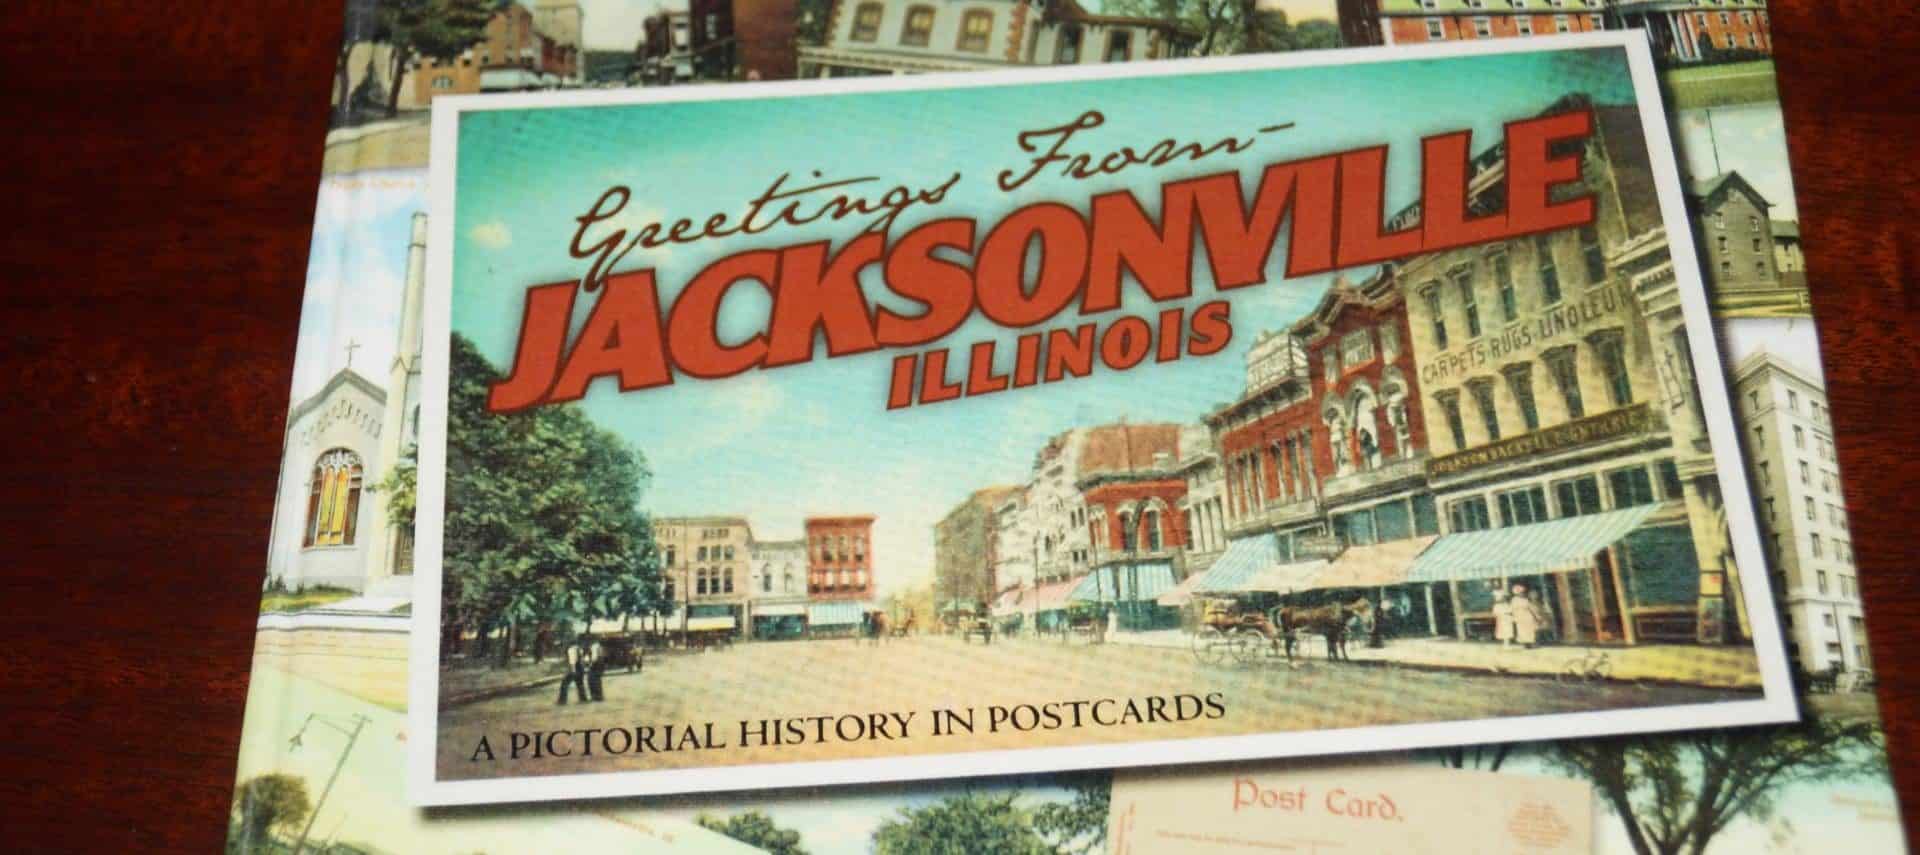 Close up view of coffee table book about Jacksonville Illinois